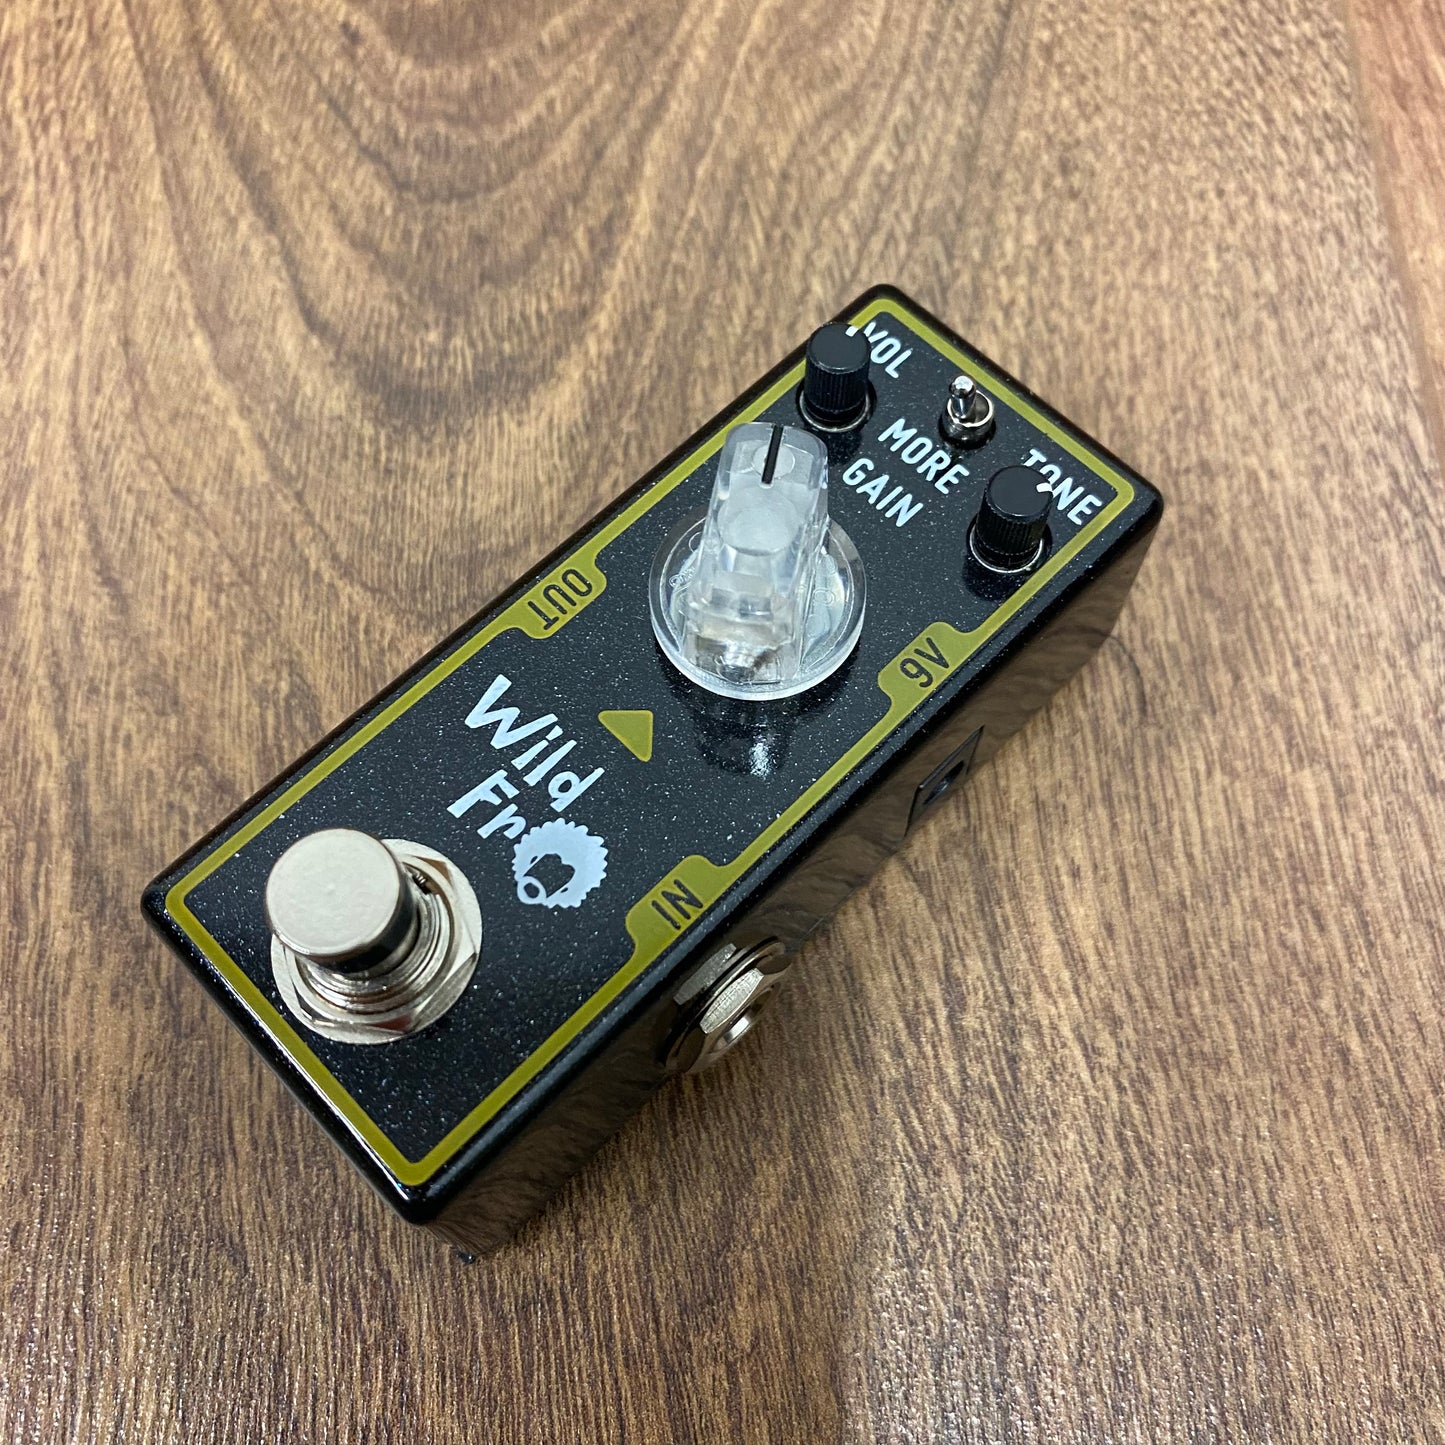 Pre-Owned Tone City Wild Fro Distortion Pedal